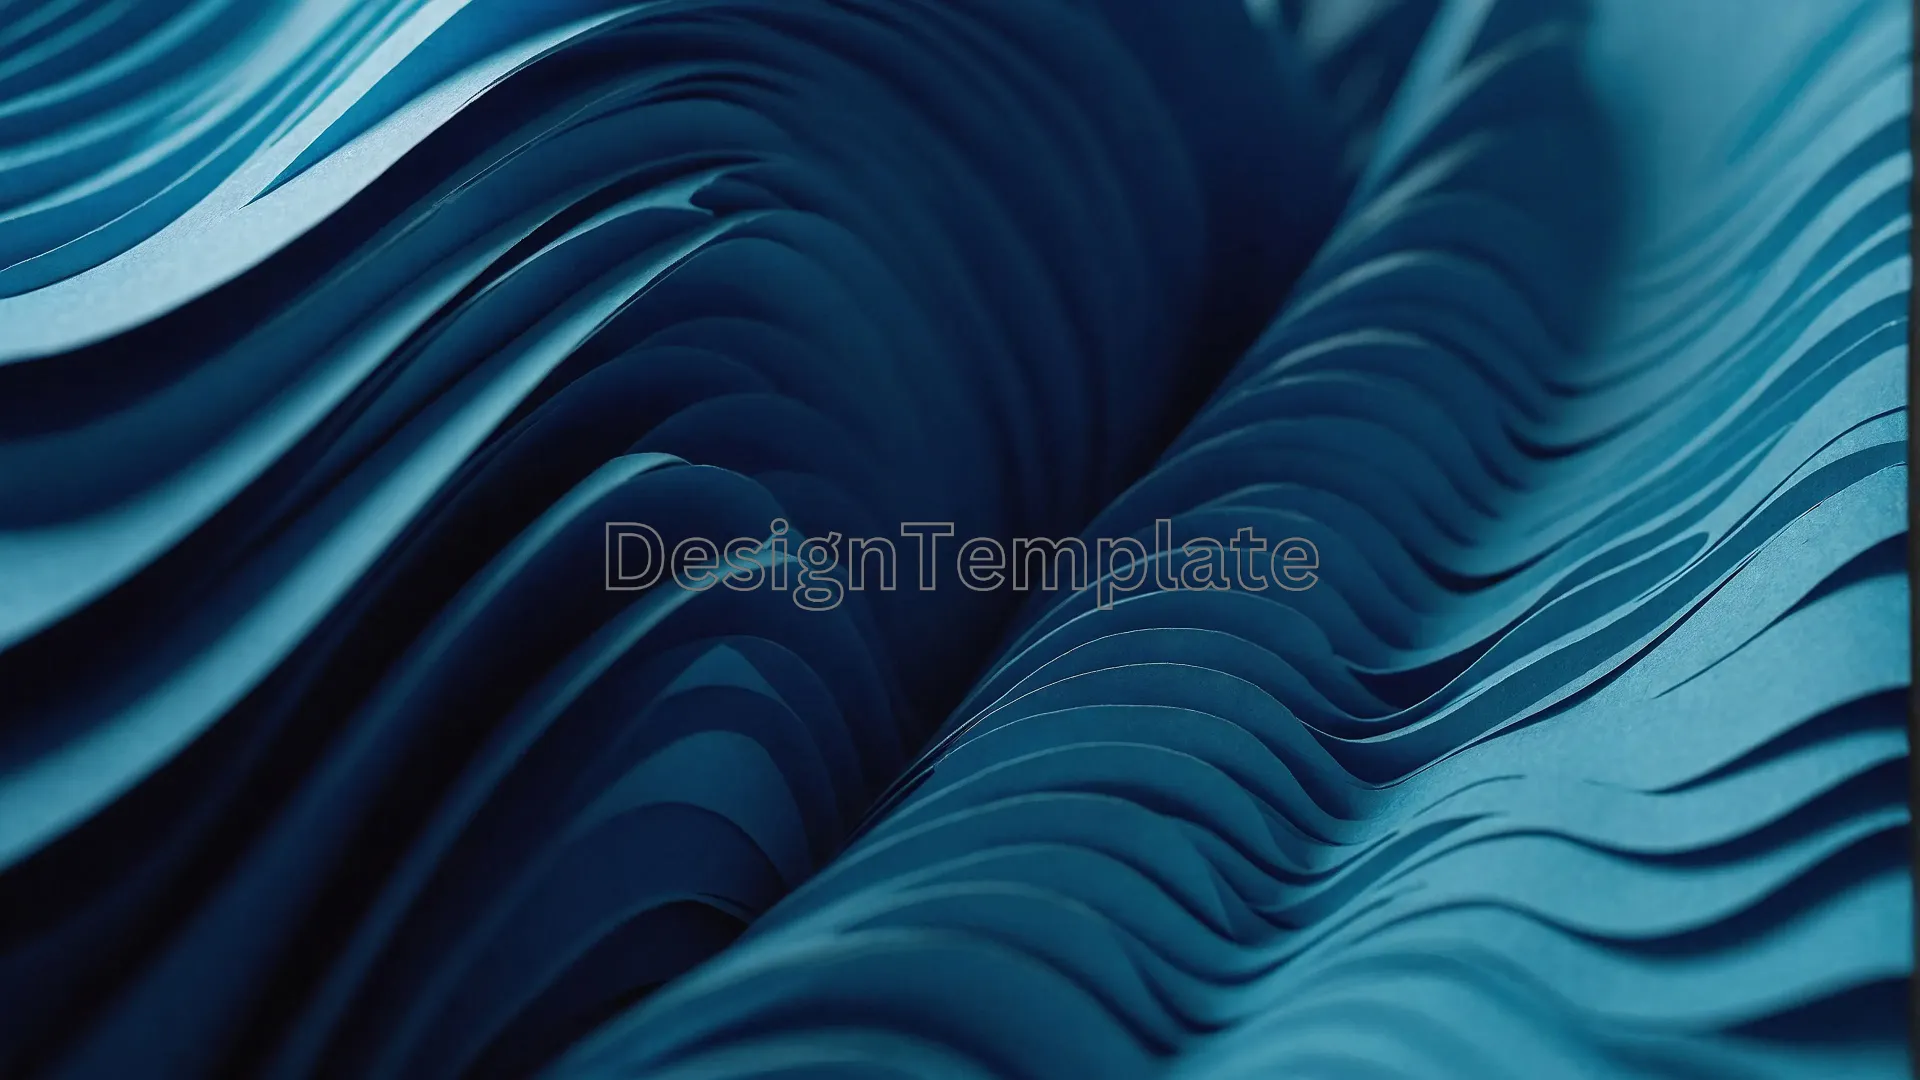 Blue Paper Crafted Waves Background Image